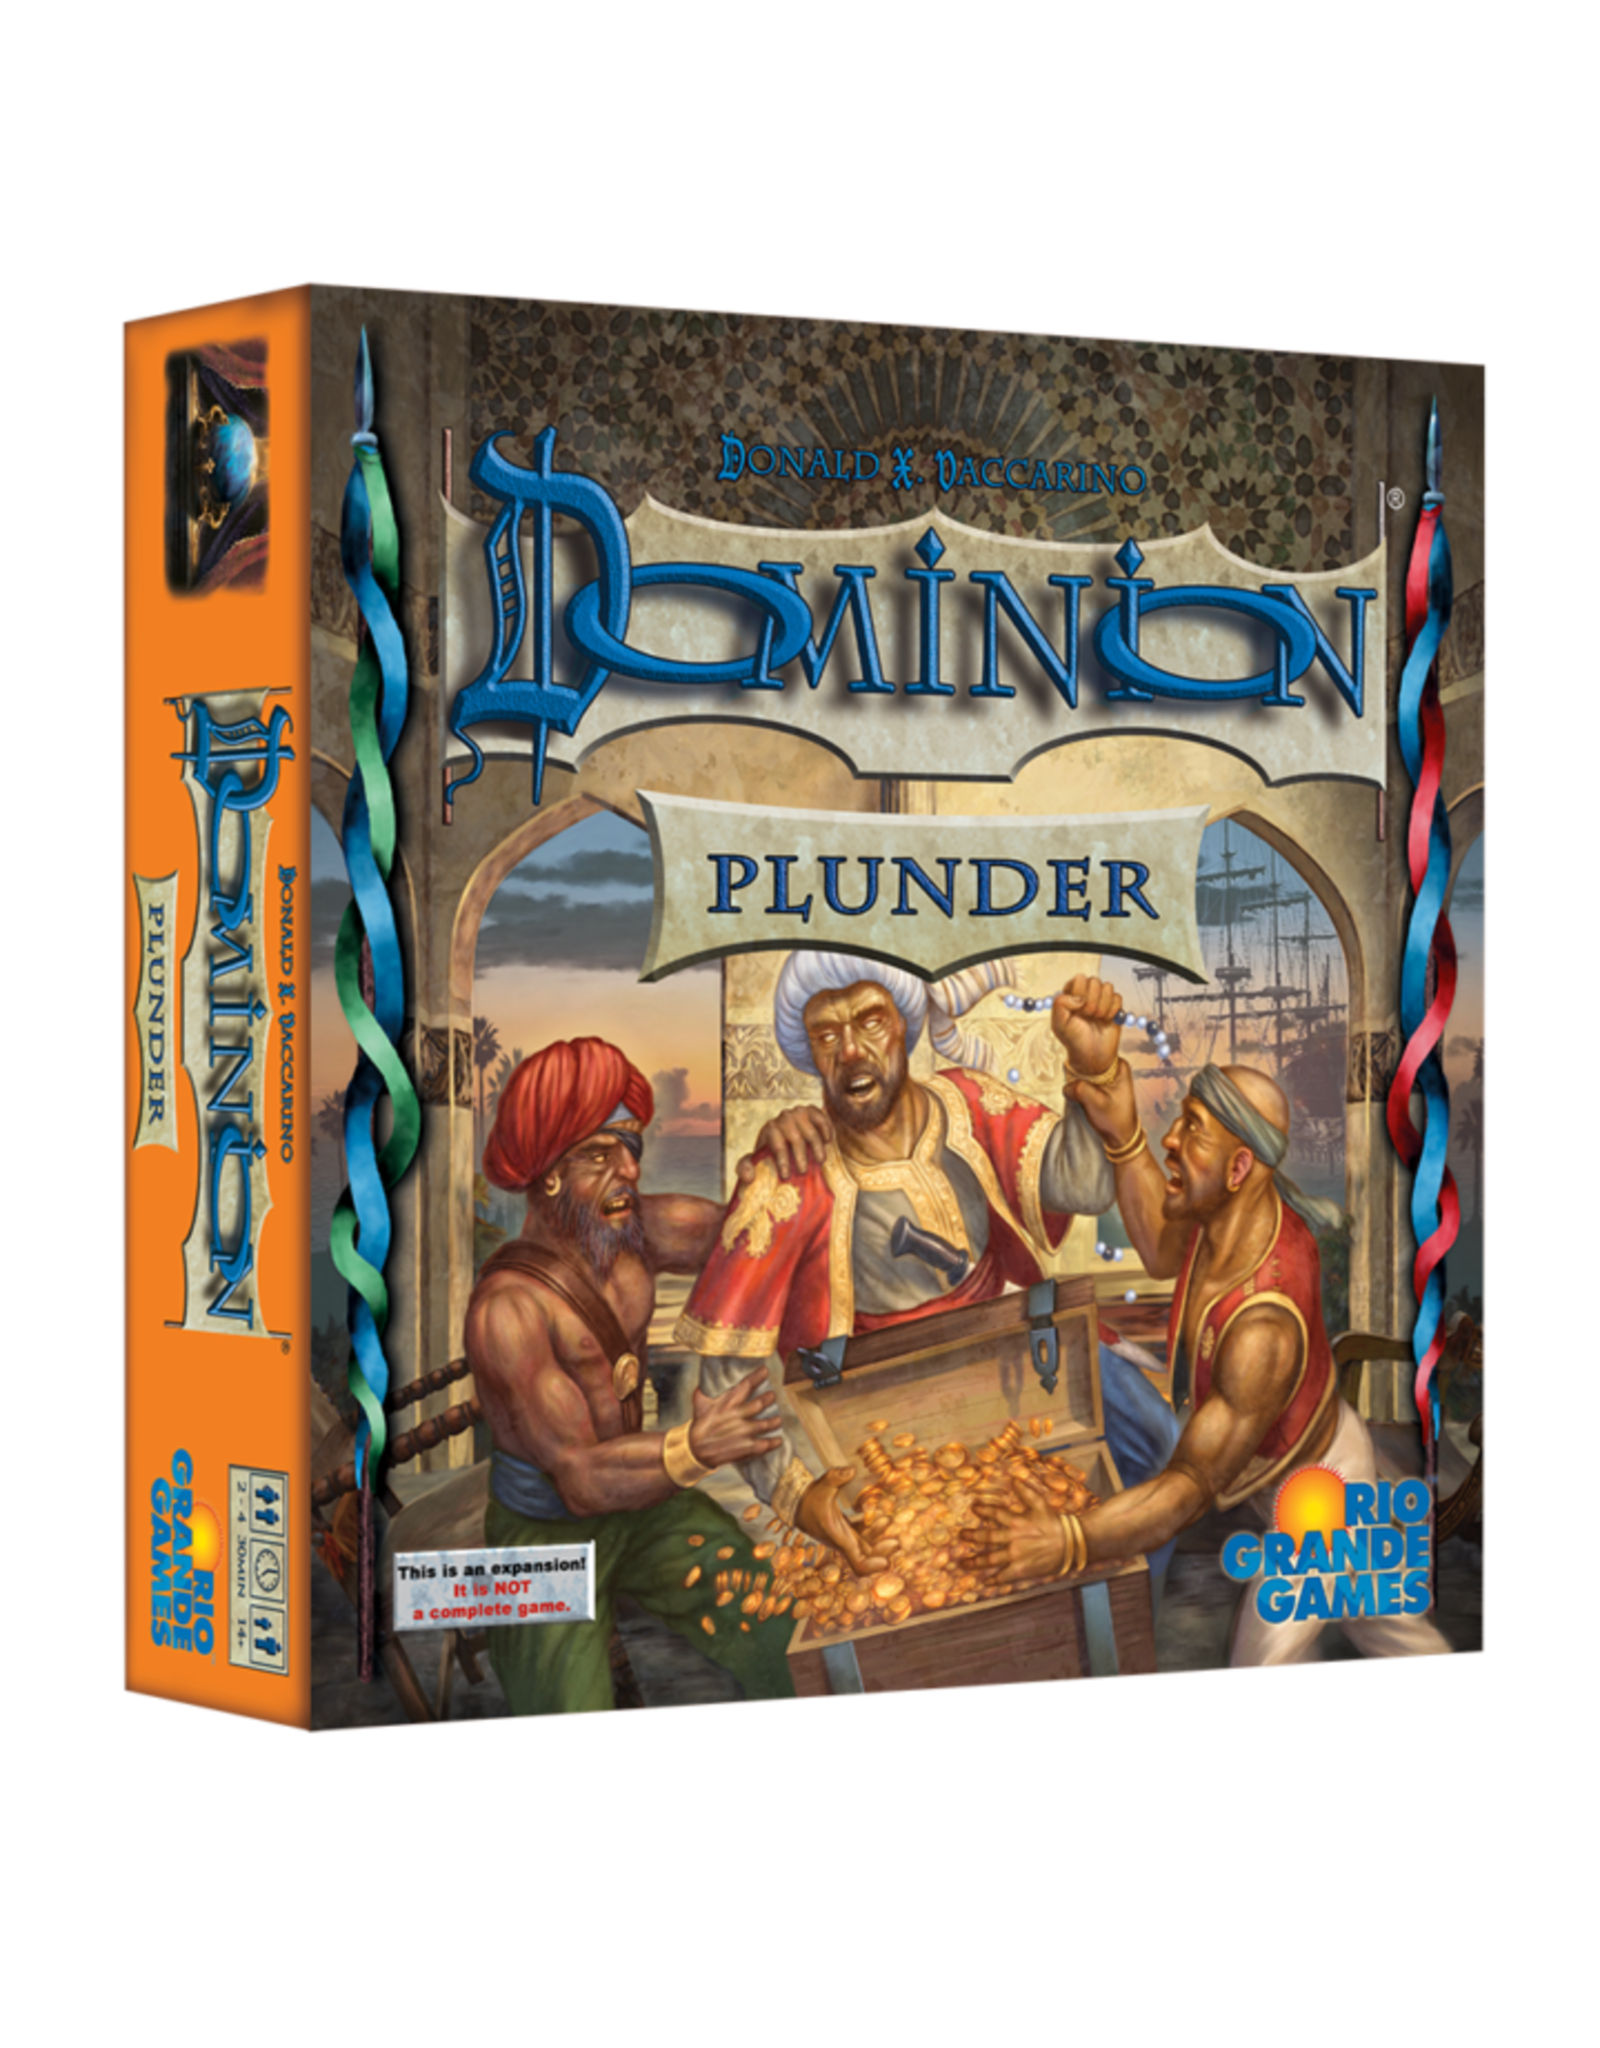 Rio Grande Games Dominion 2nd Edition: Plunder Expansion